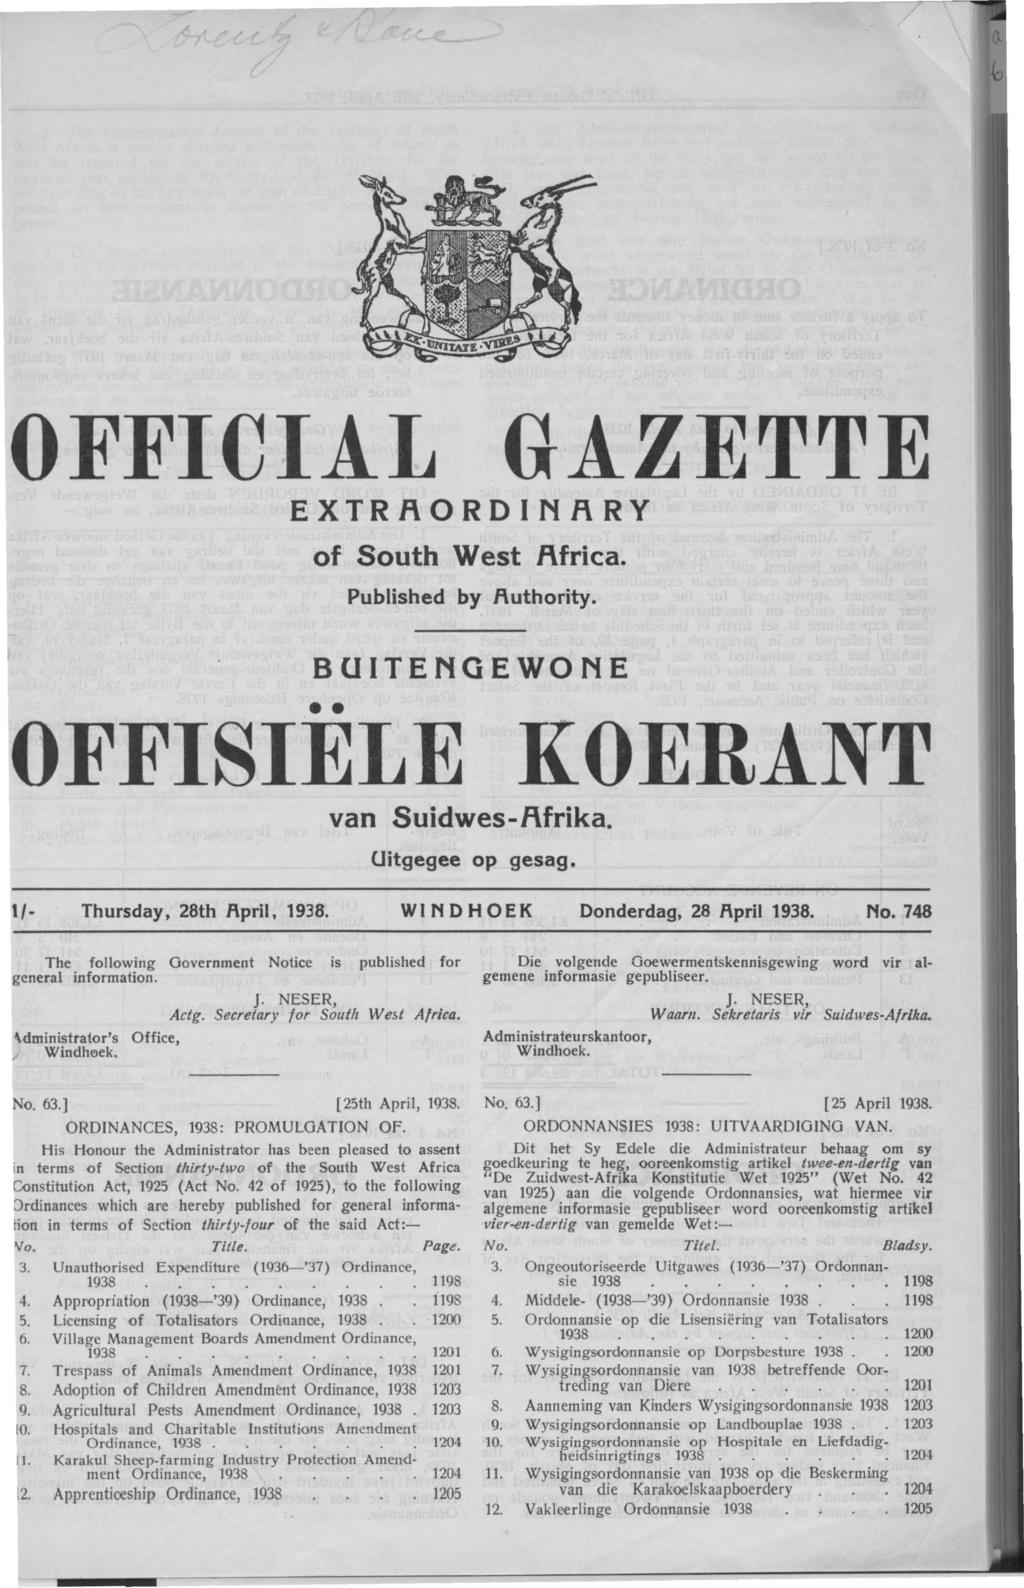 OFFICIAL GAZETTE EXTR.f\ORDIN.f\RY of South West 1\frica. Published by.1\uthority. BUITENGEWONE IOFFISIELE KOERANT van Suidwes-f\frika. Uitgegee op gesag. 1/- Thursday, 28th 1\pril, 1938.